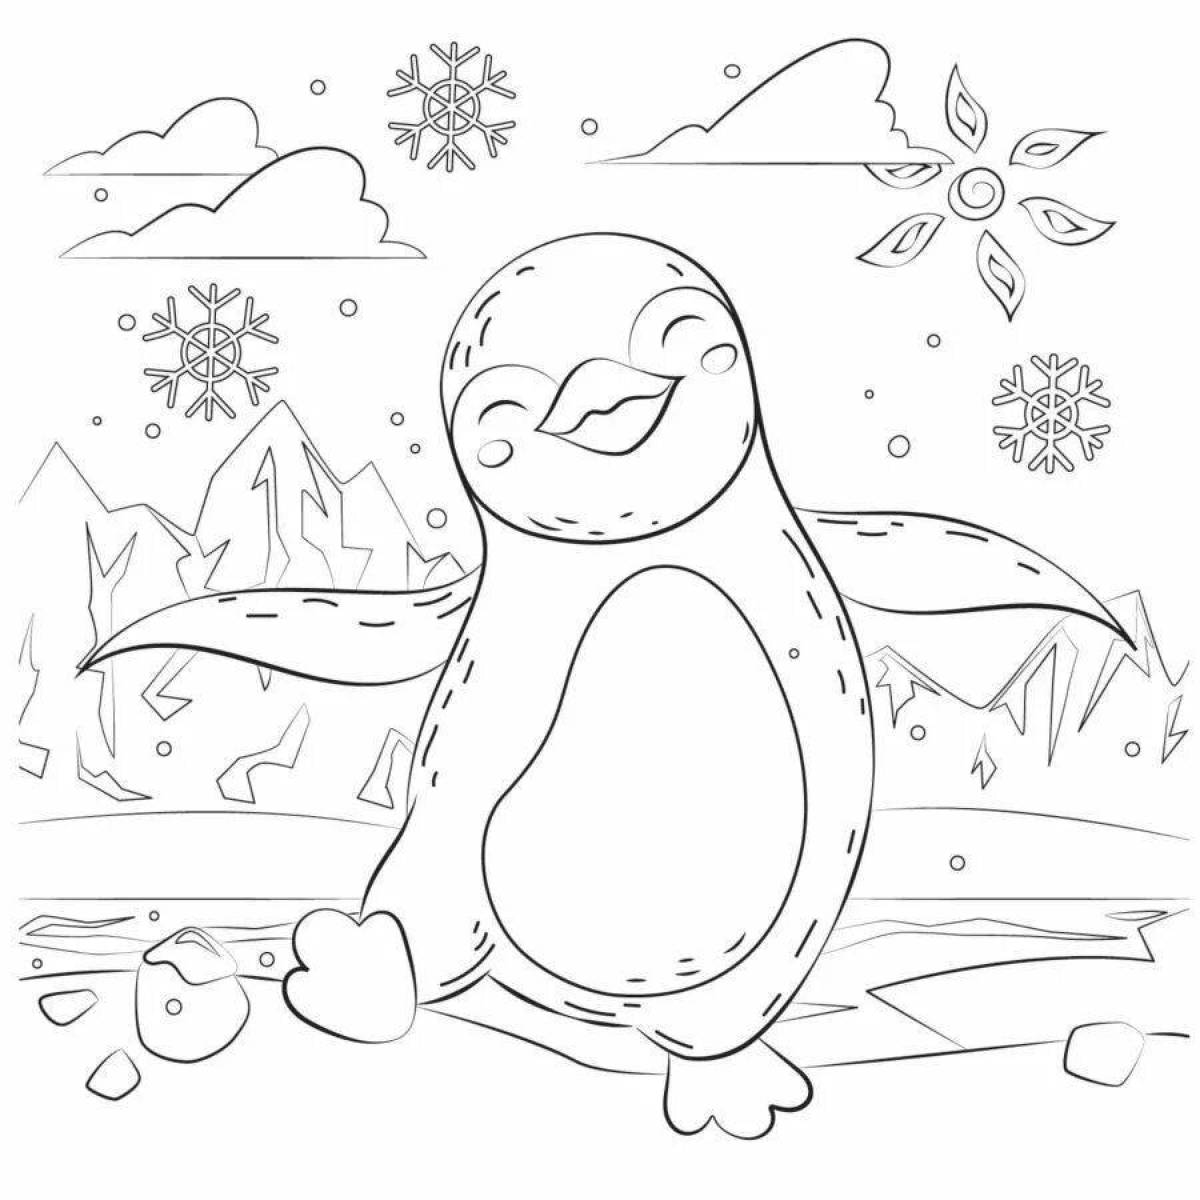 Coloring page friendly cute penguin